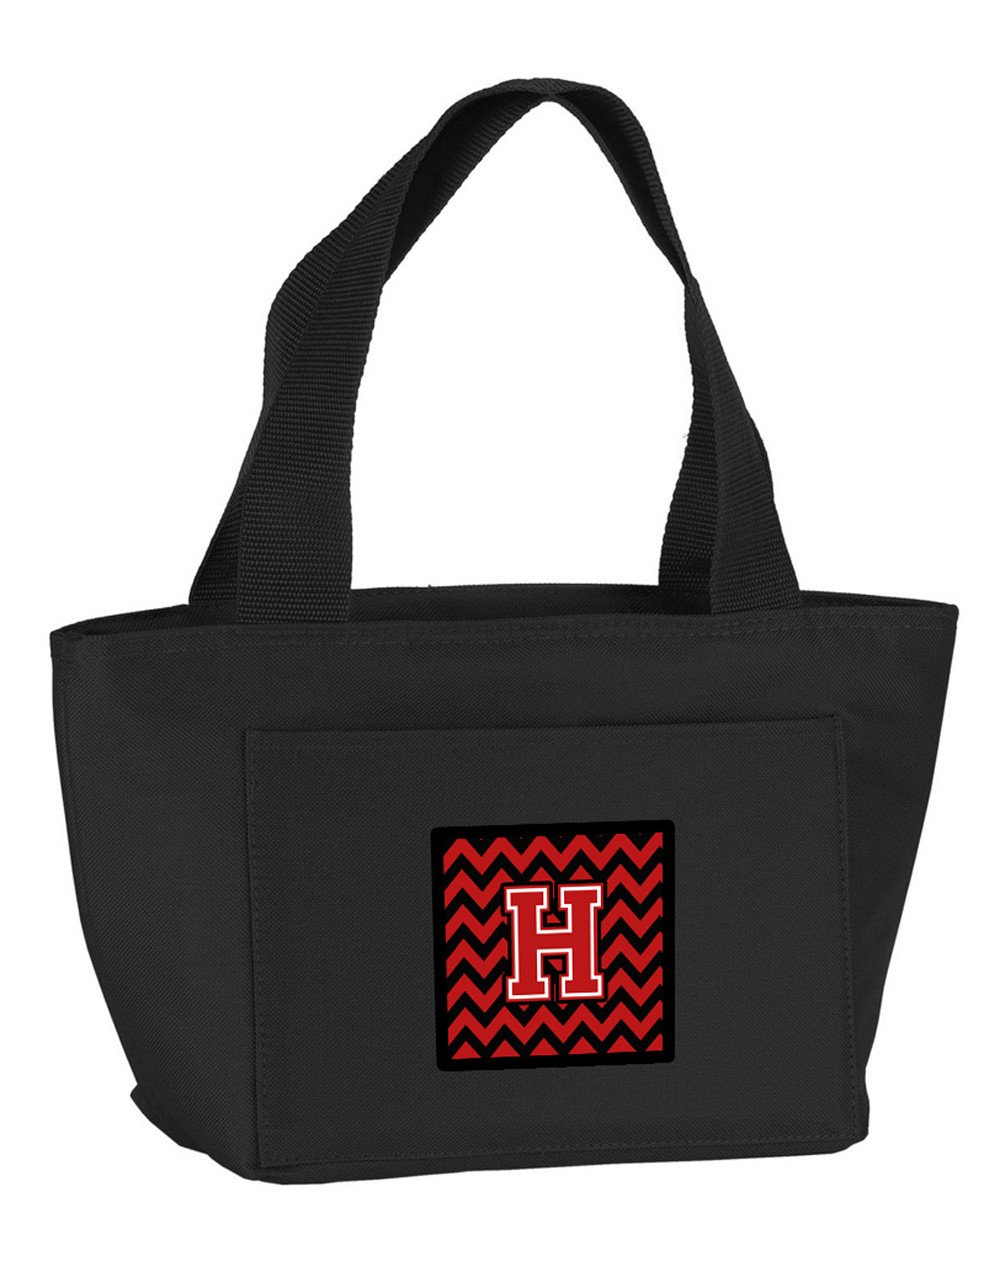 Letter H Chevron Black and Red   Lunch Bag CJ1047-HBK-8808 by Caroline's Treasures